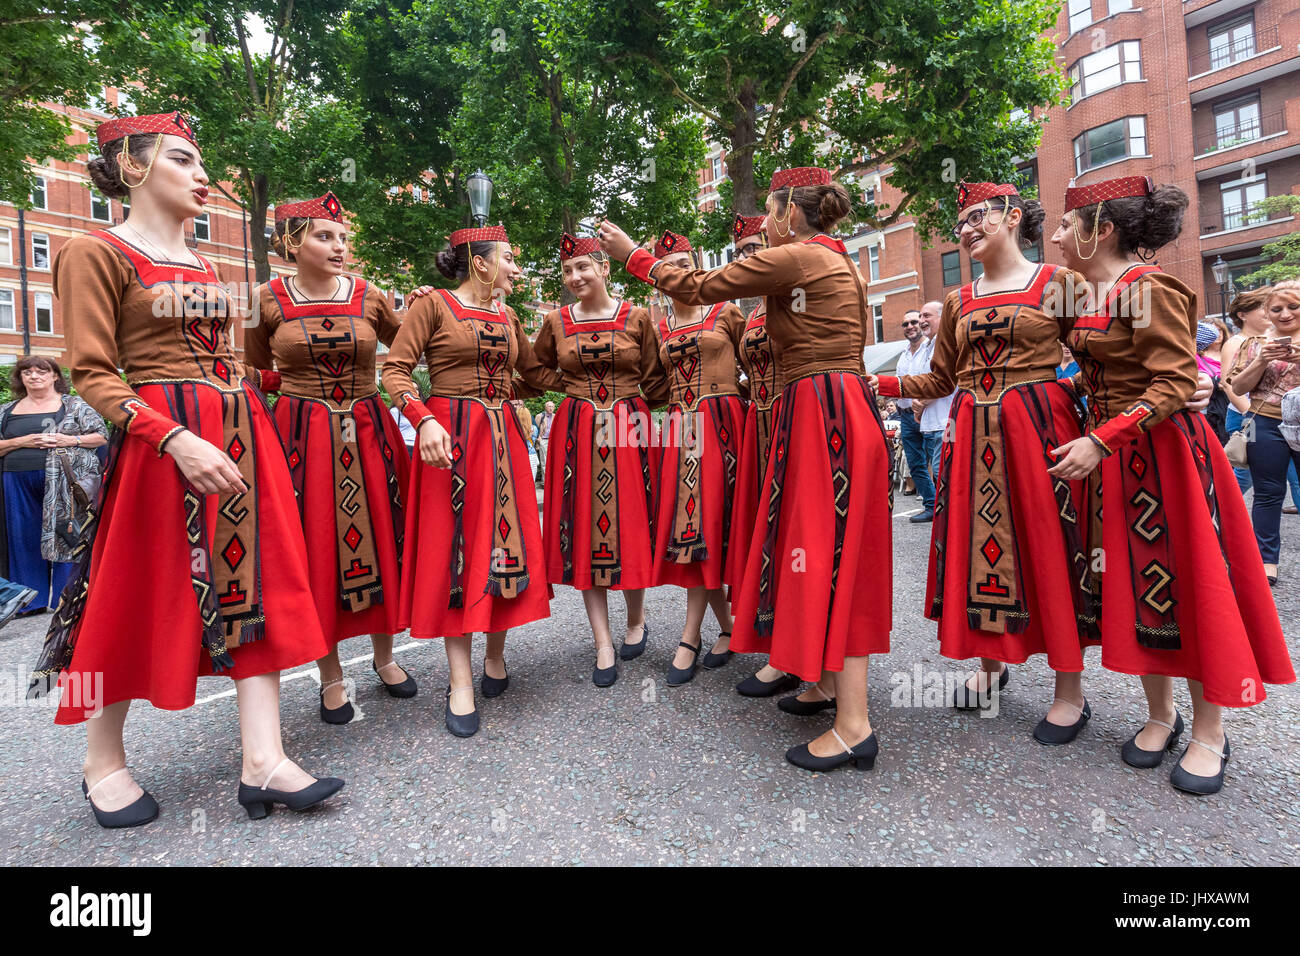 London, UK. 16th July, 2017. Dancers perform at the 7th Armenian Street Festival. © Guy Corbishley/Alamy Live News Stock Photo